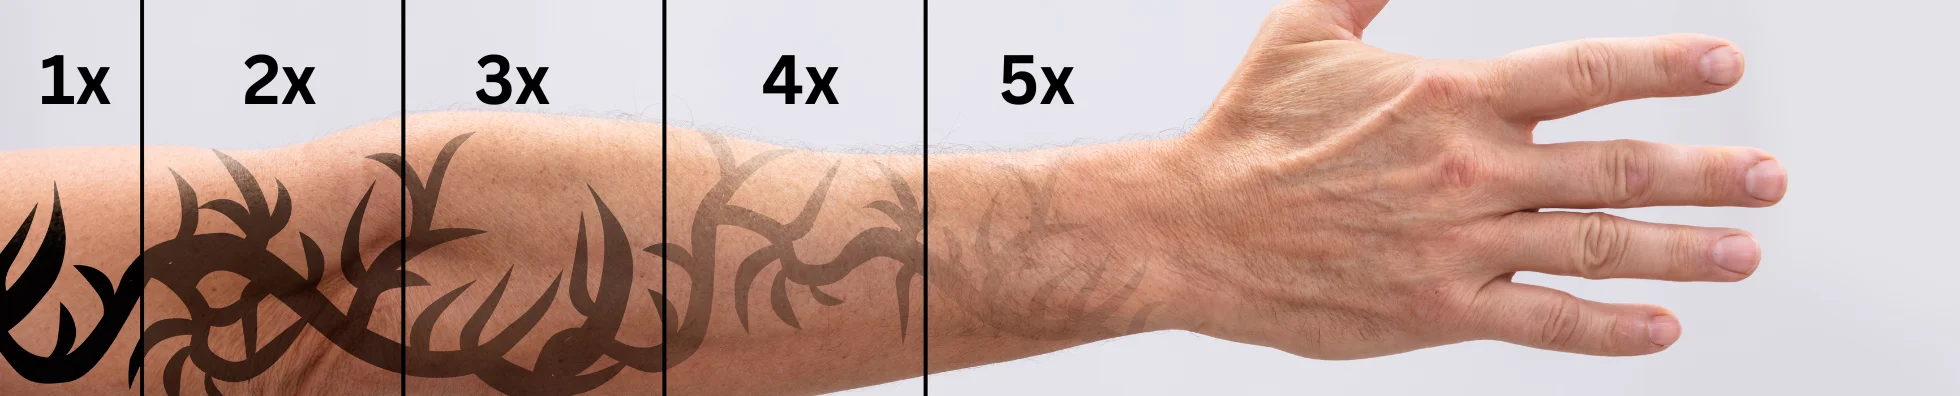 Tattoo removal 2 by 2 inches